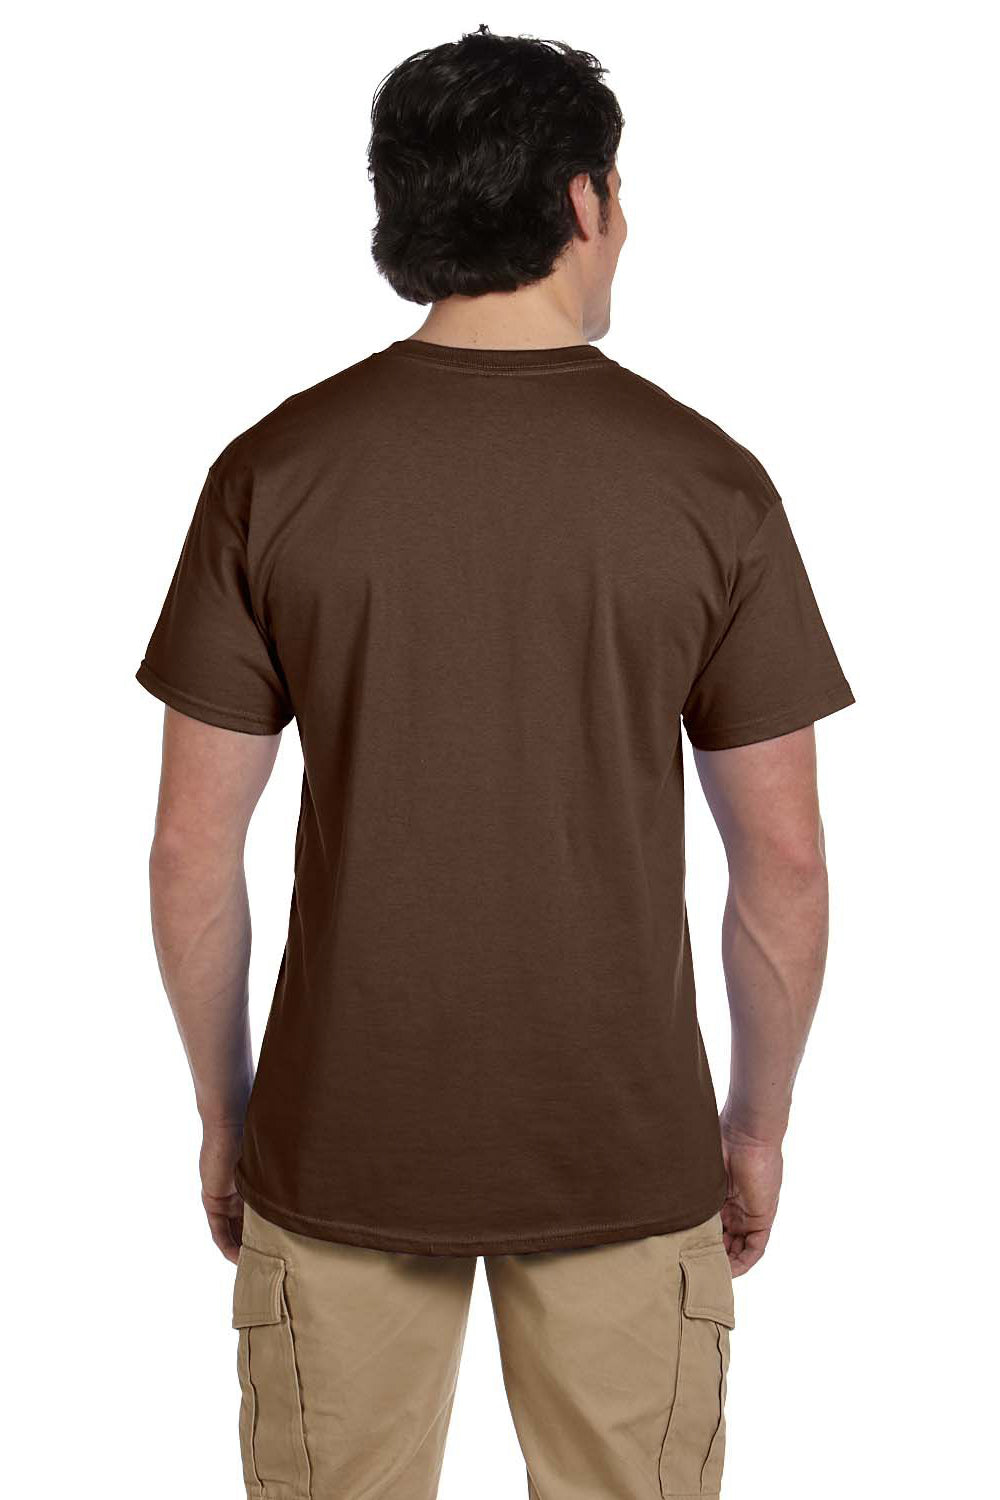 Fruit Of The Loom 3931 Mens HD Jersey Short Sleeve Crewneck T-Shirt Chocolate Brown Back